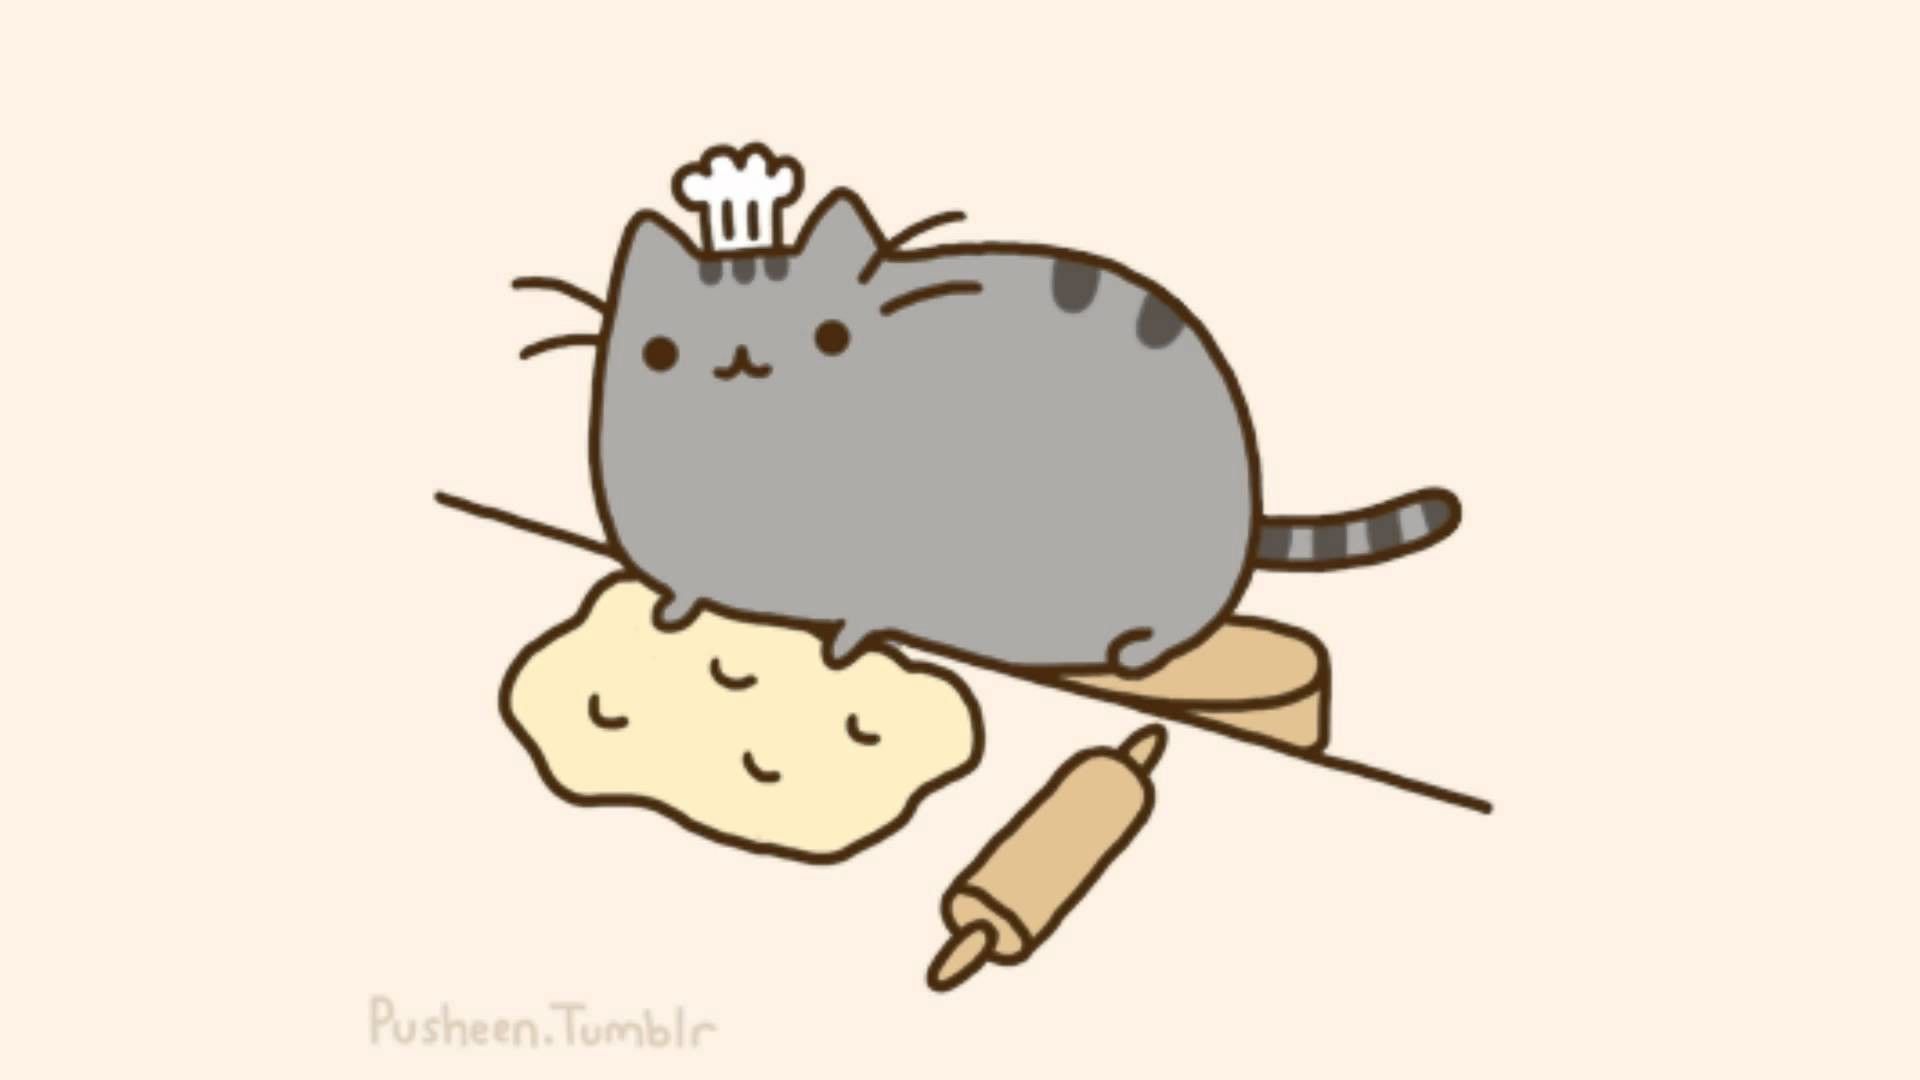 Go Back > Image For > Pusheen The Cat Wallpaper The Cat